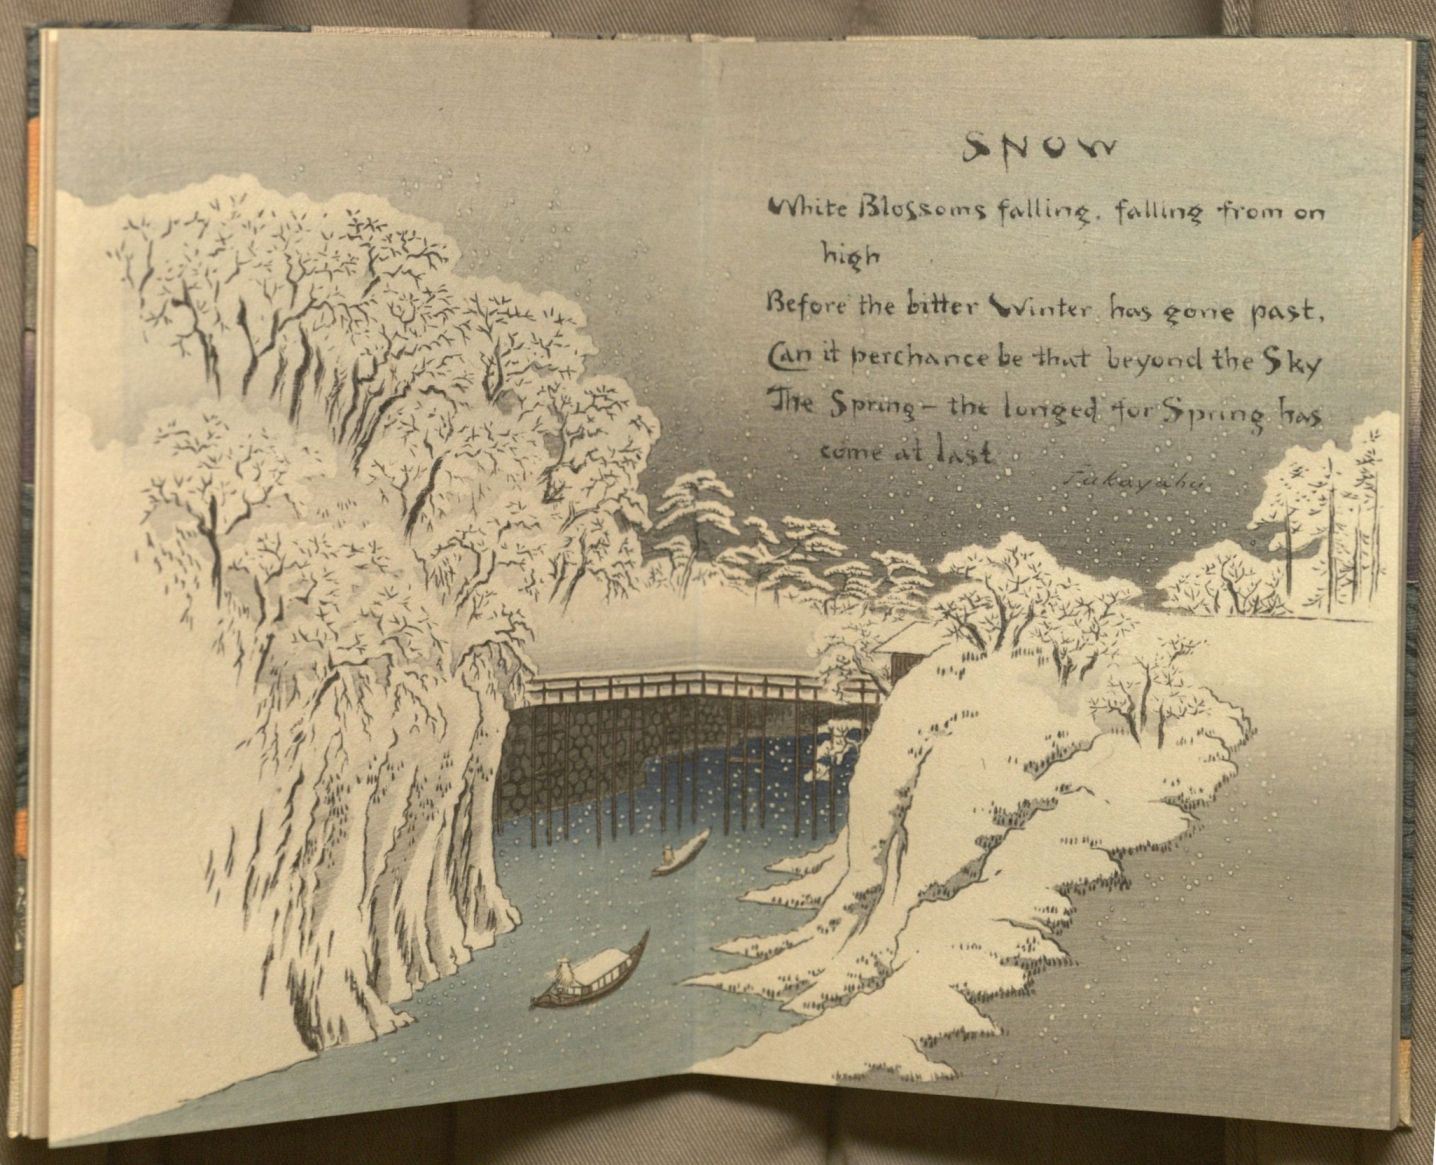 Image of poem "Snow" from "Sword and Blossom POems"